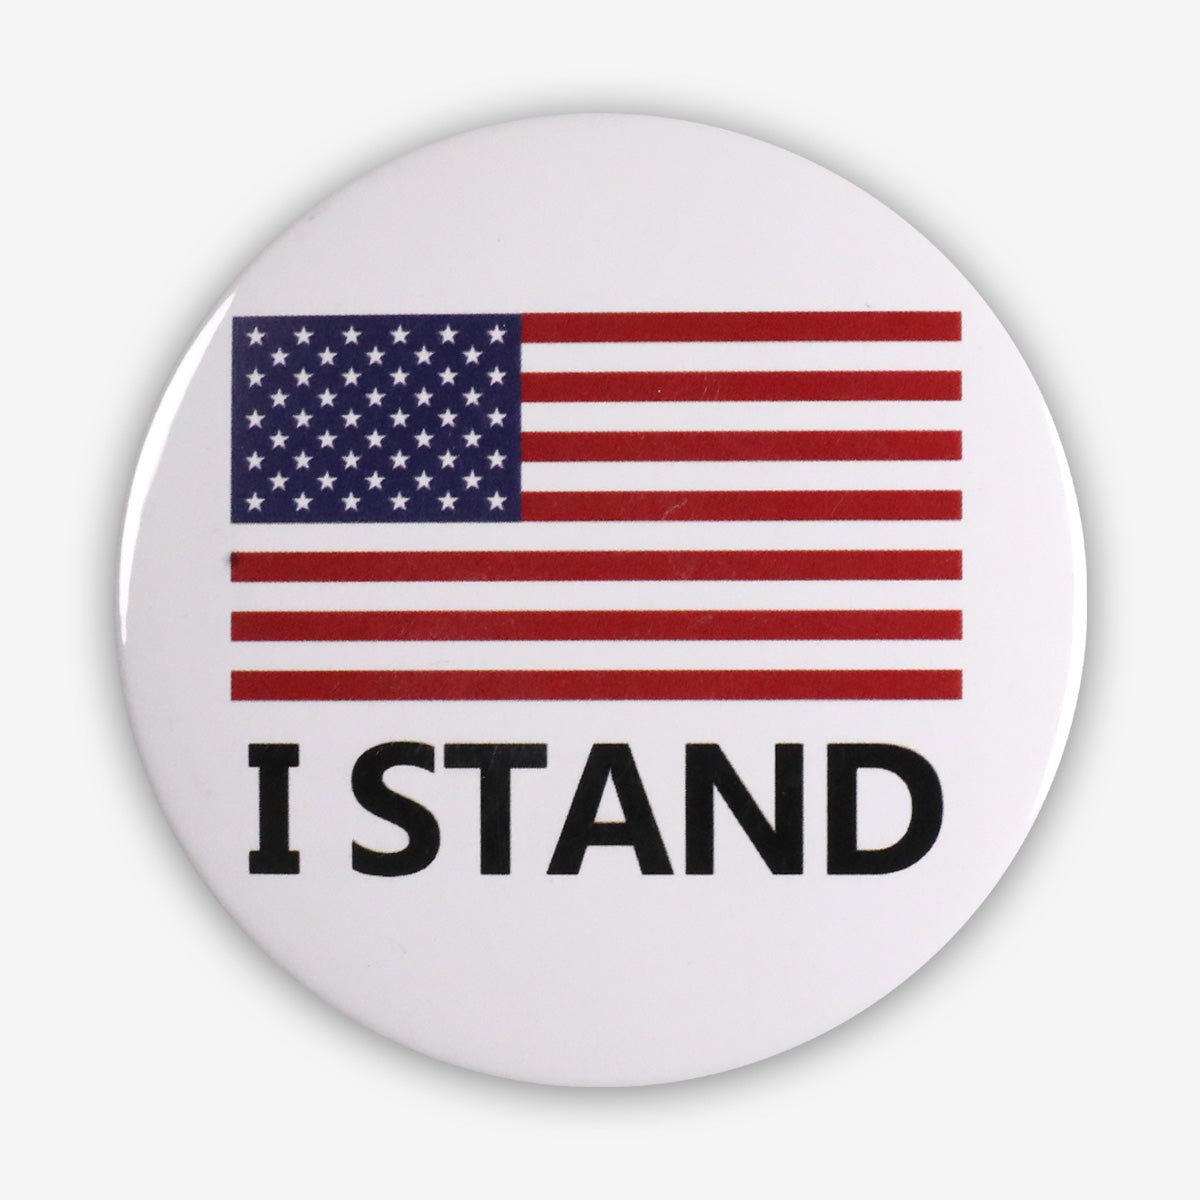 Trump 2024 Button - I Stand for the Flag